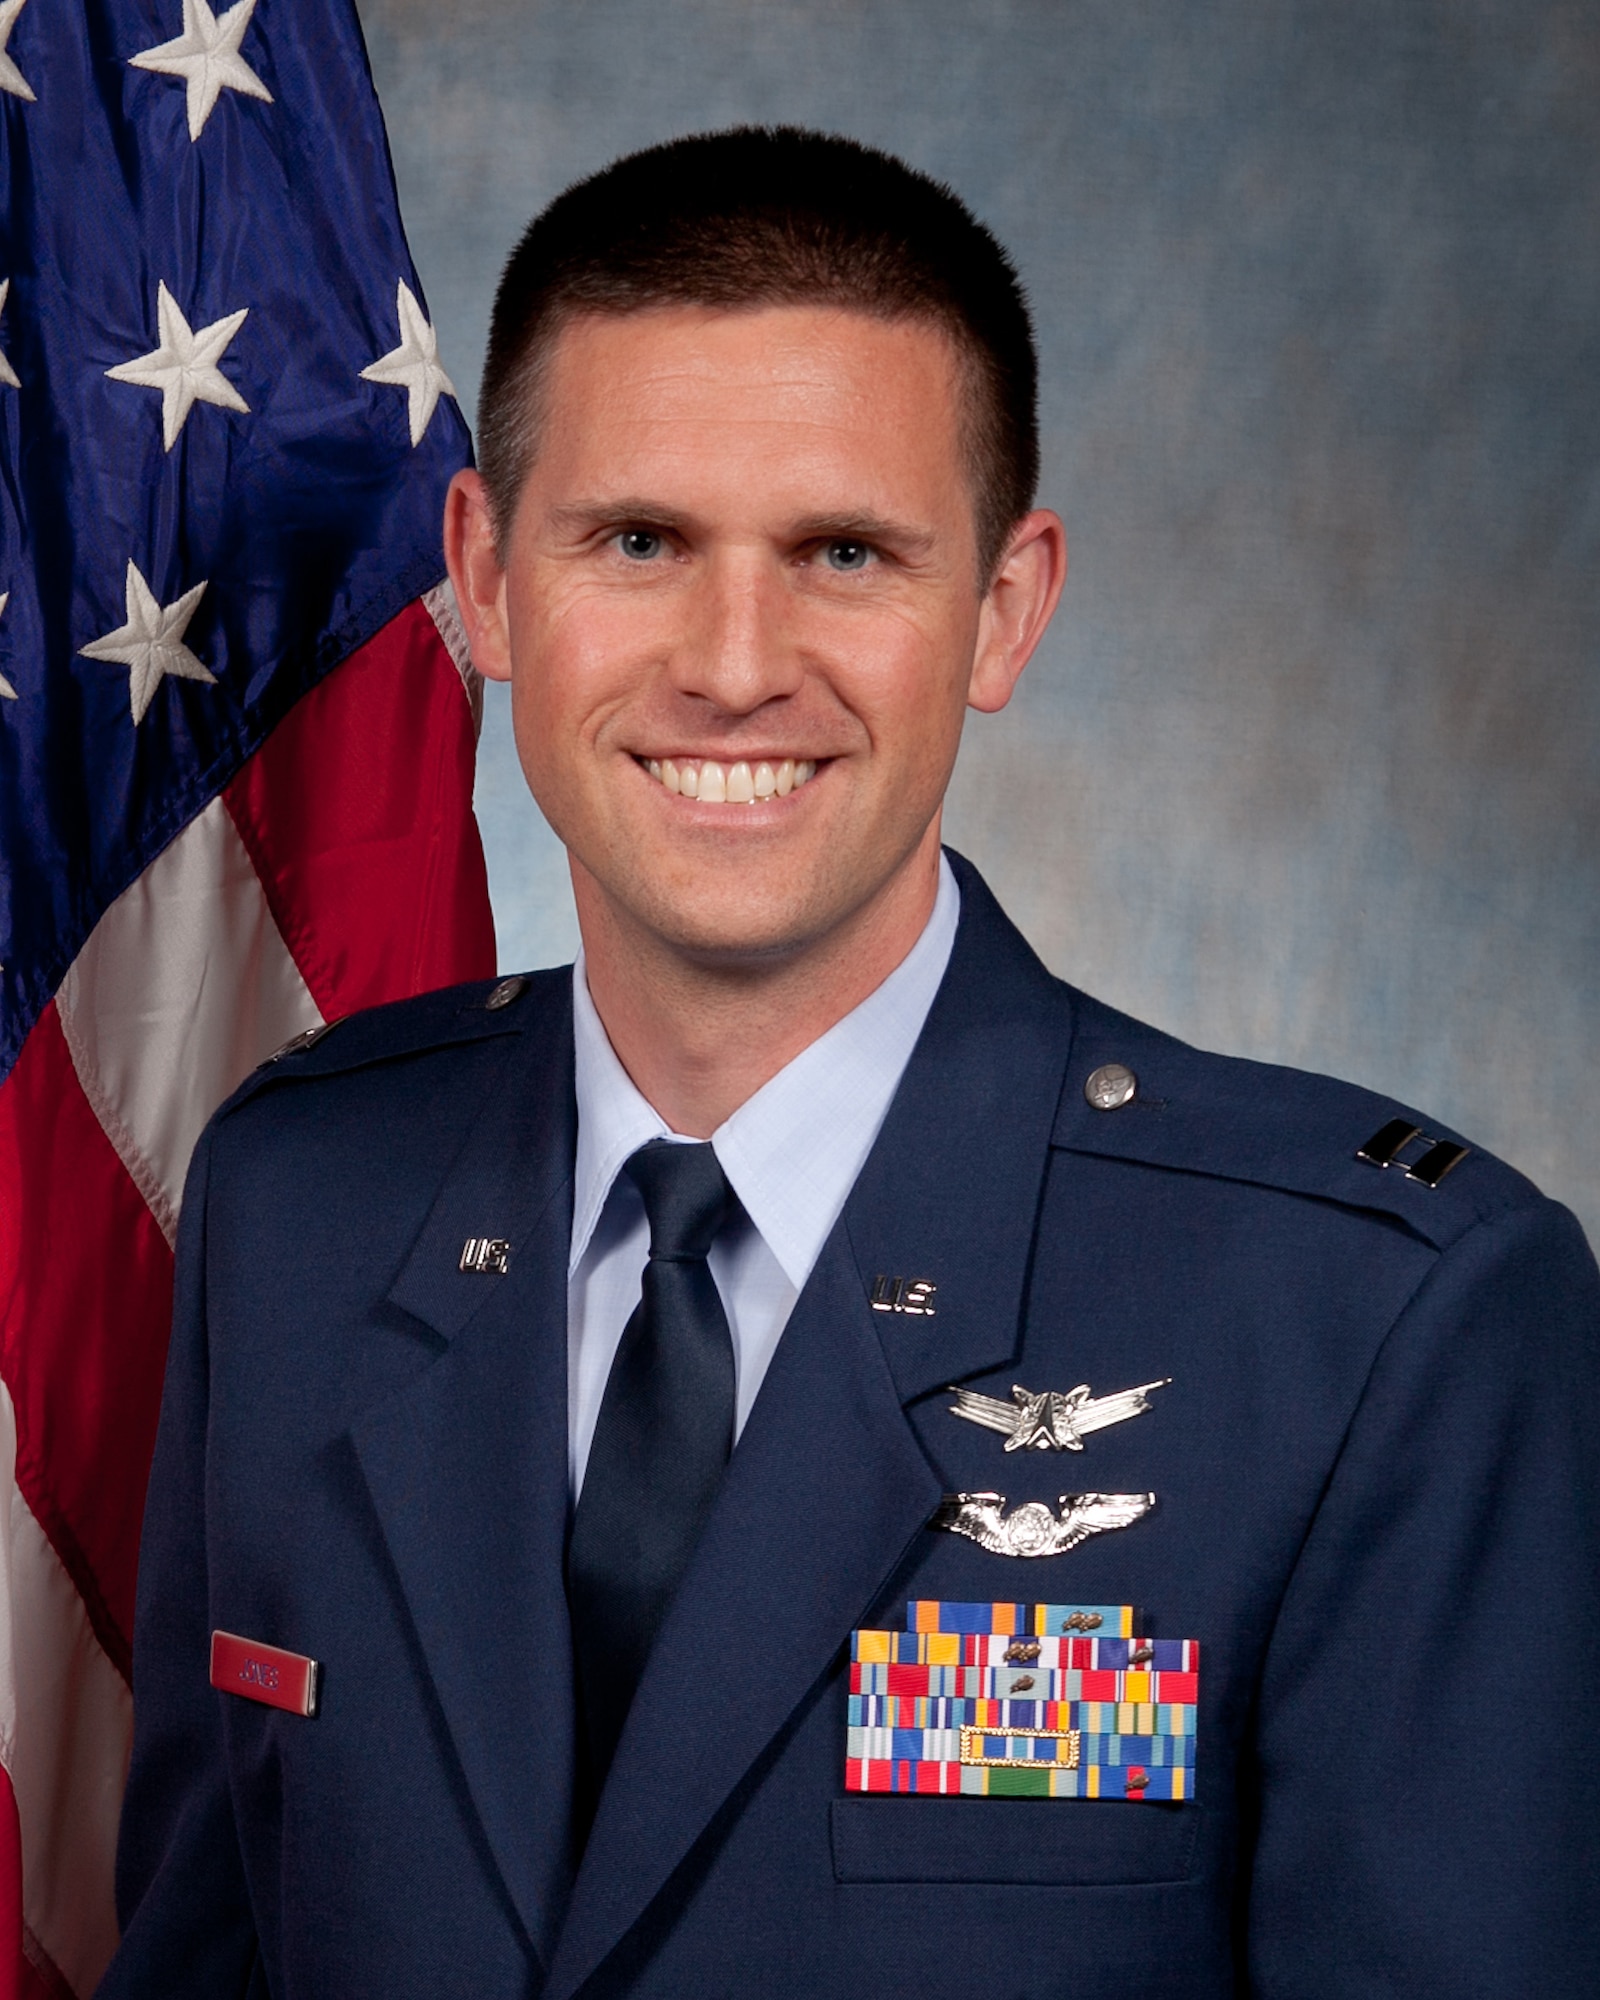 Capt. Samuel Jones, chief of the advanced capabilities section in the Special Programs Division, is one of three Air Force captains who will pursue a fully funded doctorate degree at one of more than 20 top-tier universities in September 2017. (U.S. Air Force photo)